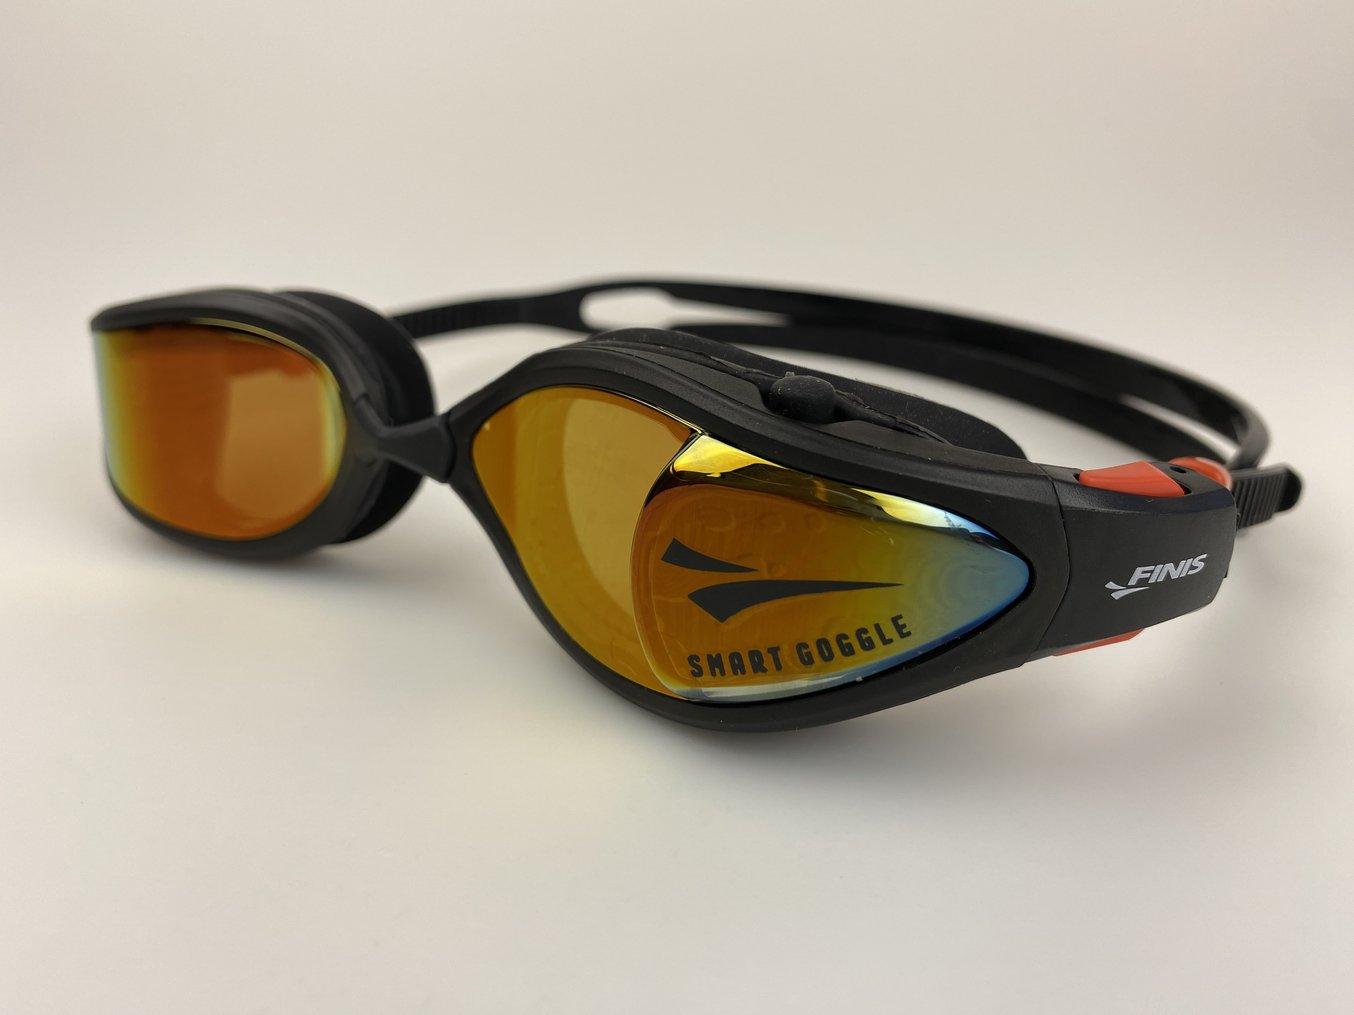 The Smart Goggle Max developed by FINIS, Inc.